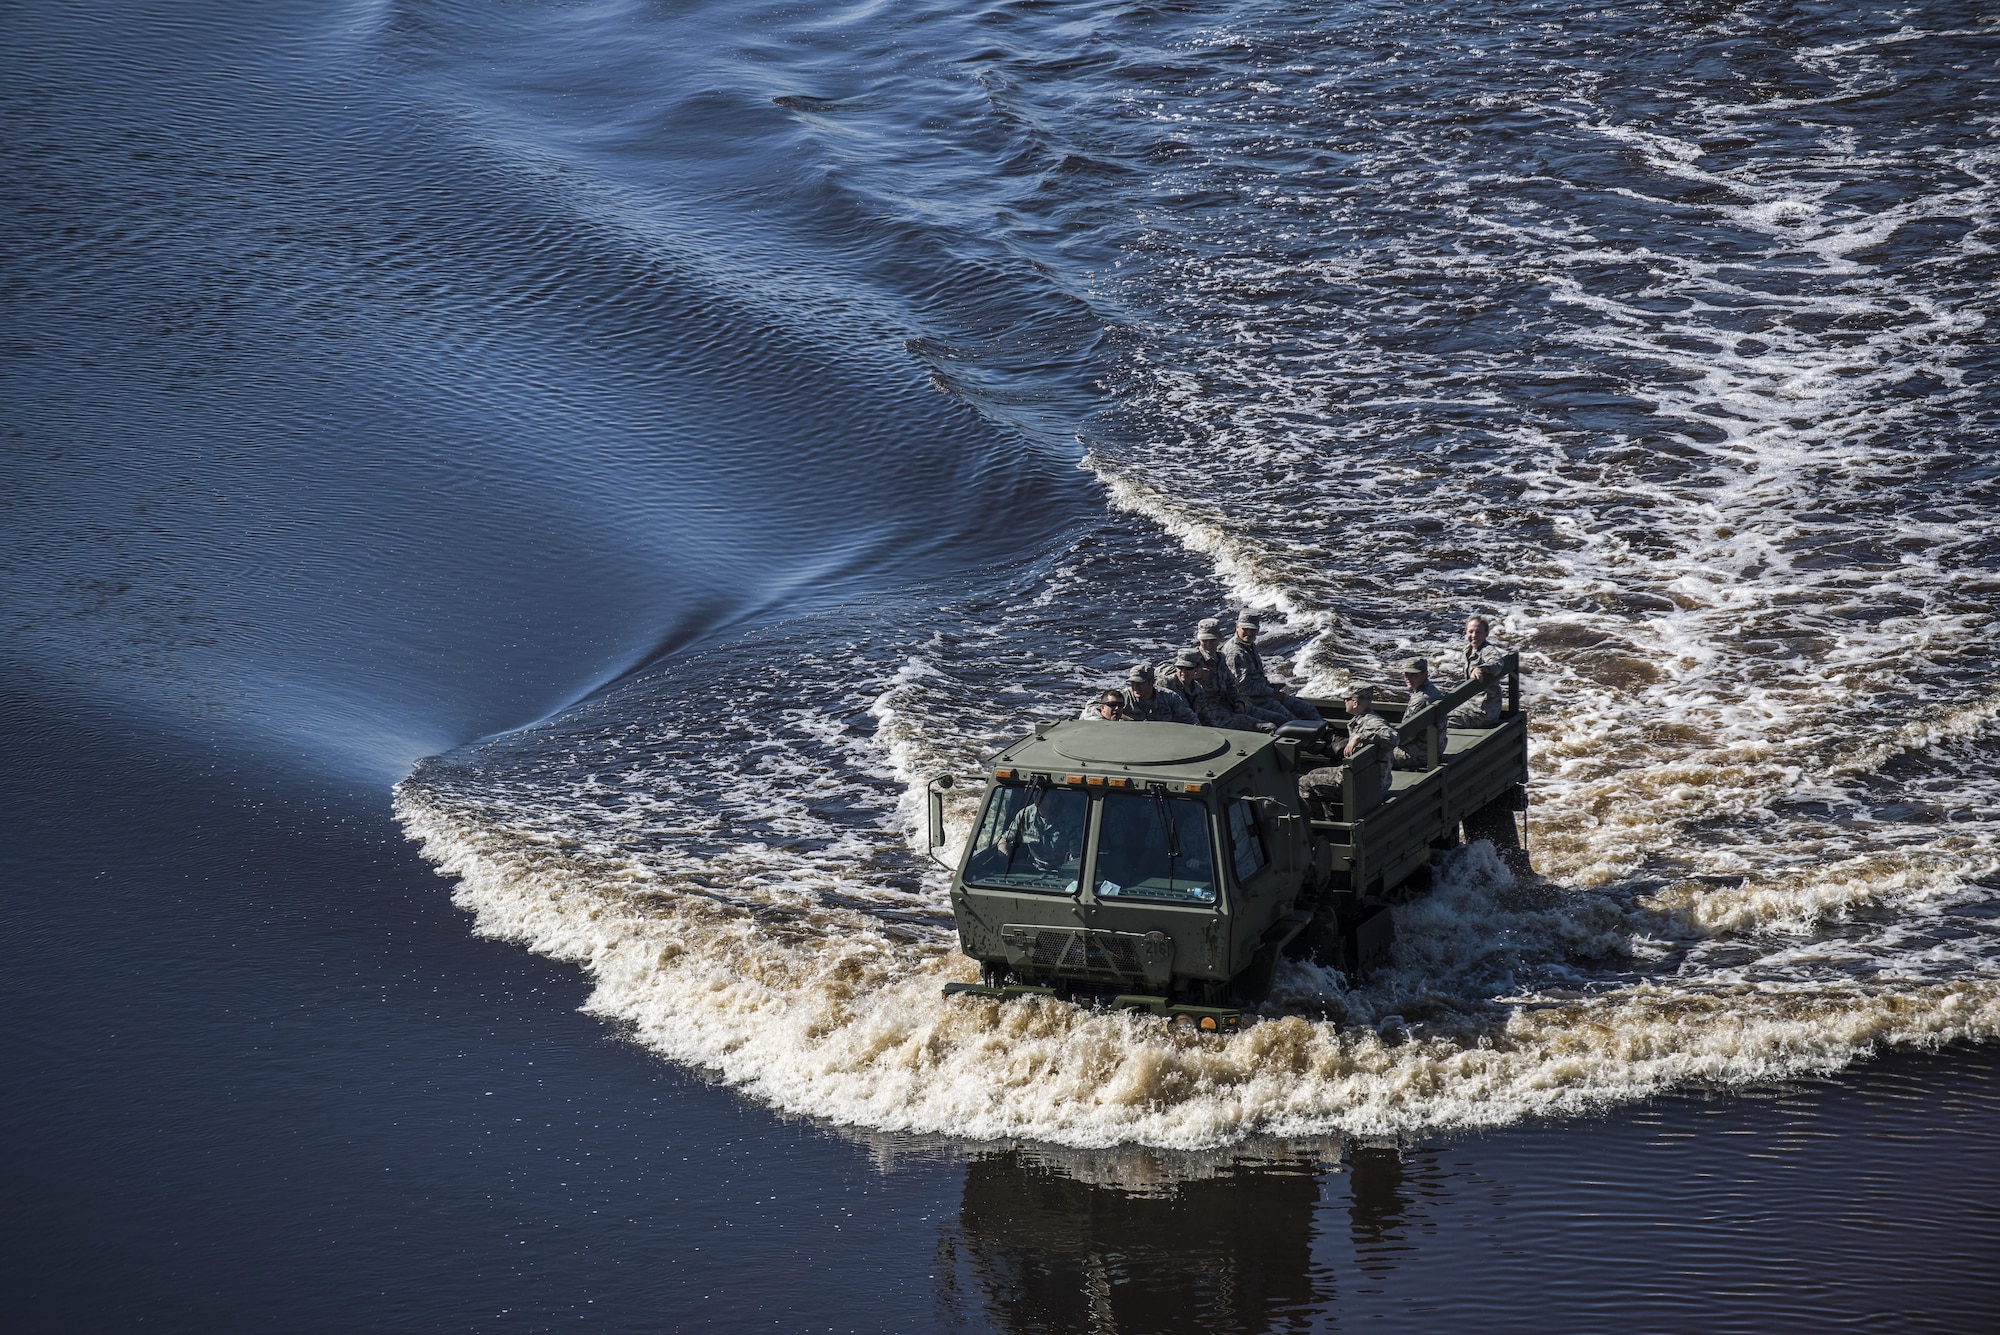 A crew of Airmen from the 4th Equipment Maintenance Squadron munitions flight drive onto the flightline through flood waters caused by Hurricane Matthew, Oct. 11, 2016, at Seymour Johnson Air Force Base, North Carolina. According to the National Weather Service, the Neuse River, located just outside the base perimeter, crested at a new record stage of 29.09 feet. (U.S. Air Force photo by Senior Airman Brittain Crolley)